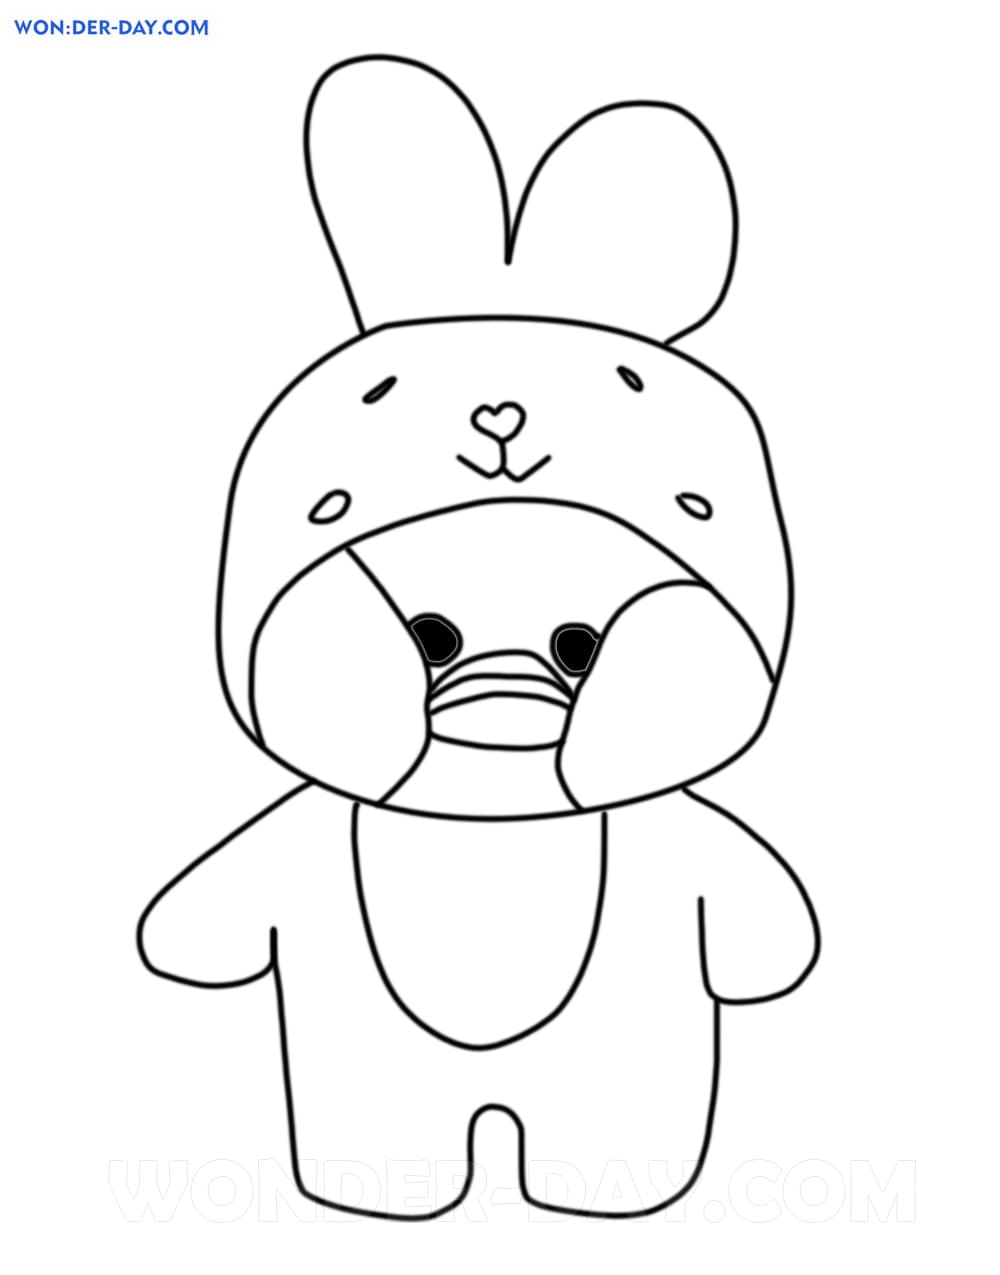 Lalafanfan duck coloring pages free coloring pages